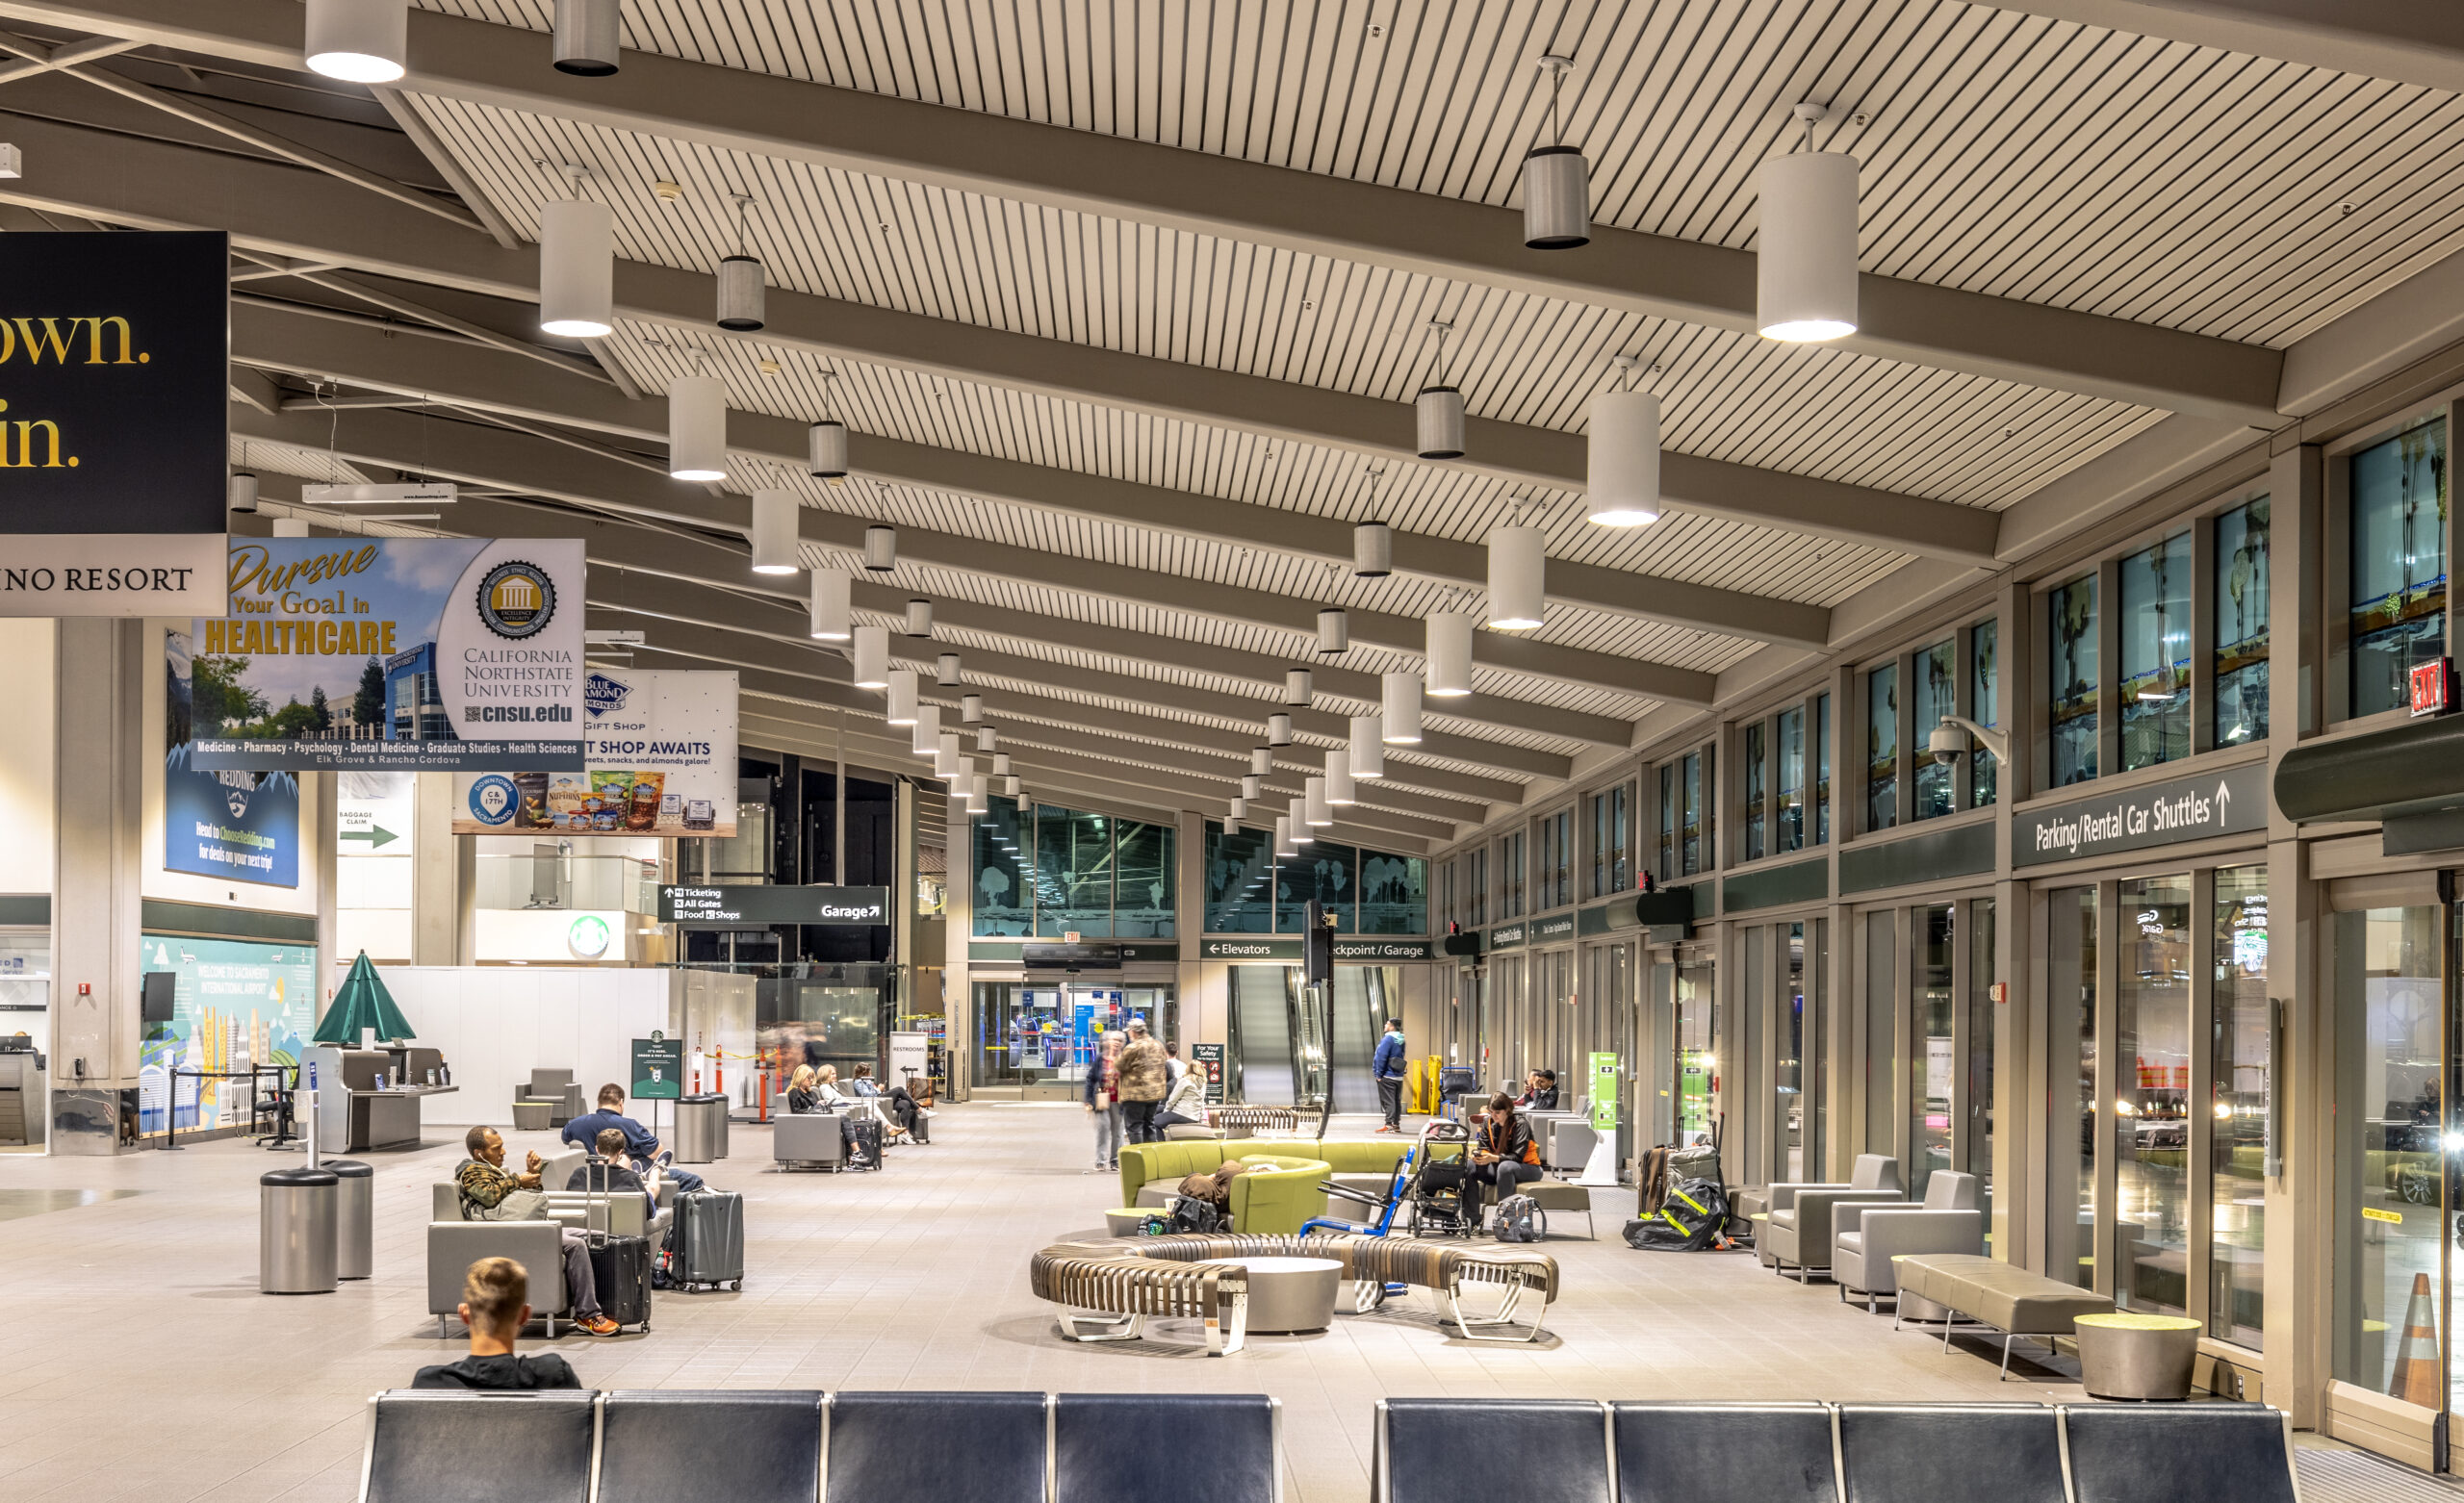 Filamento lights used for high ceiling Sacramento Airport, increasing LED output, reducing glare, and increasing efficiency.